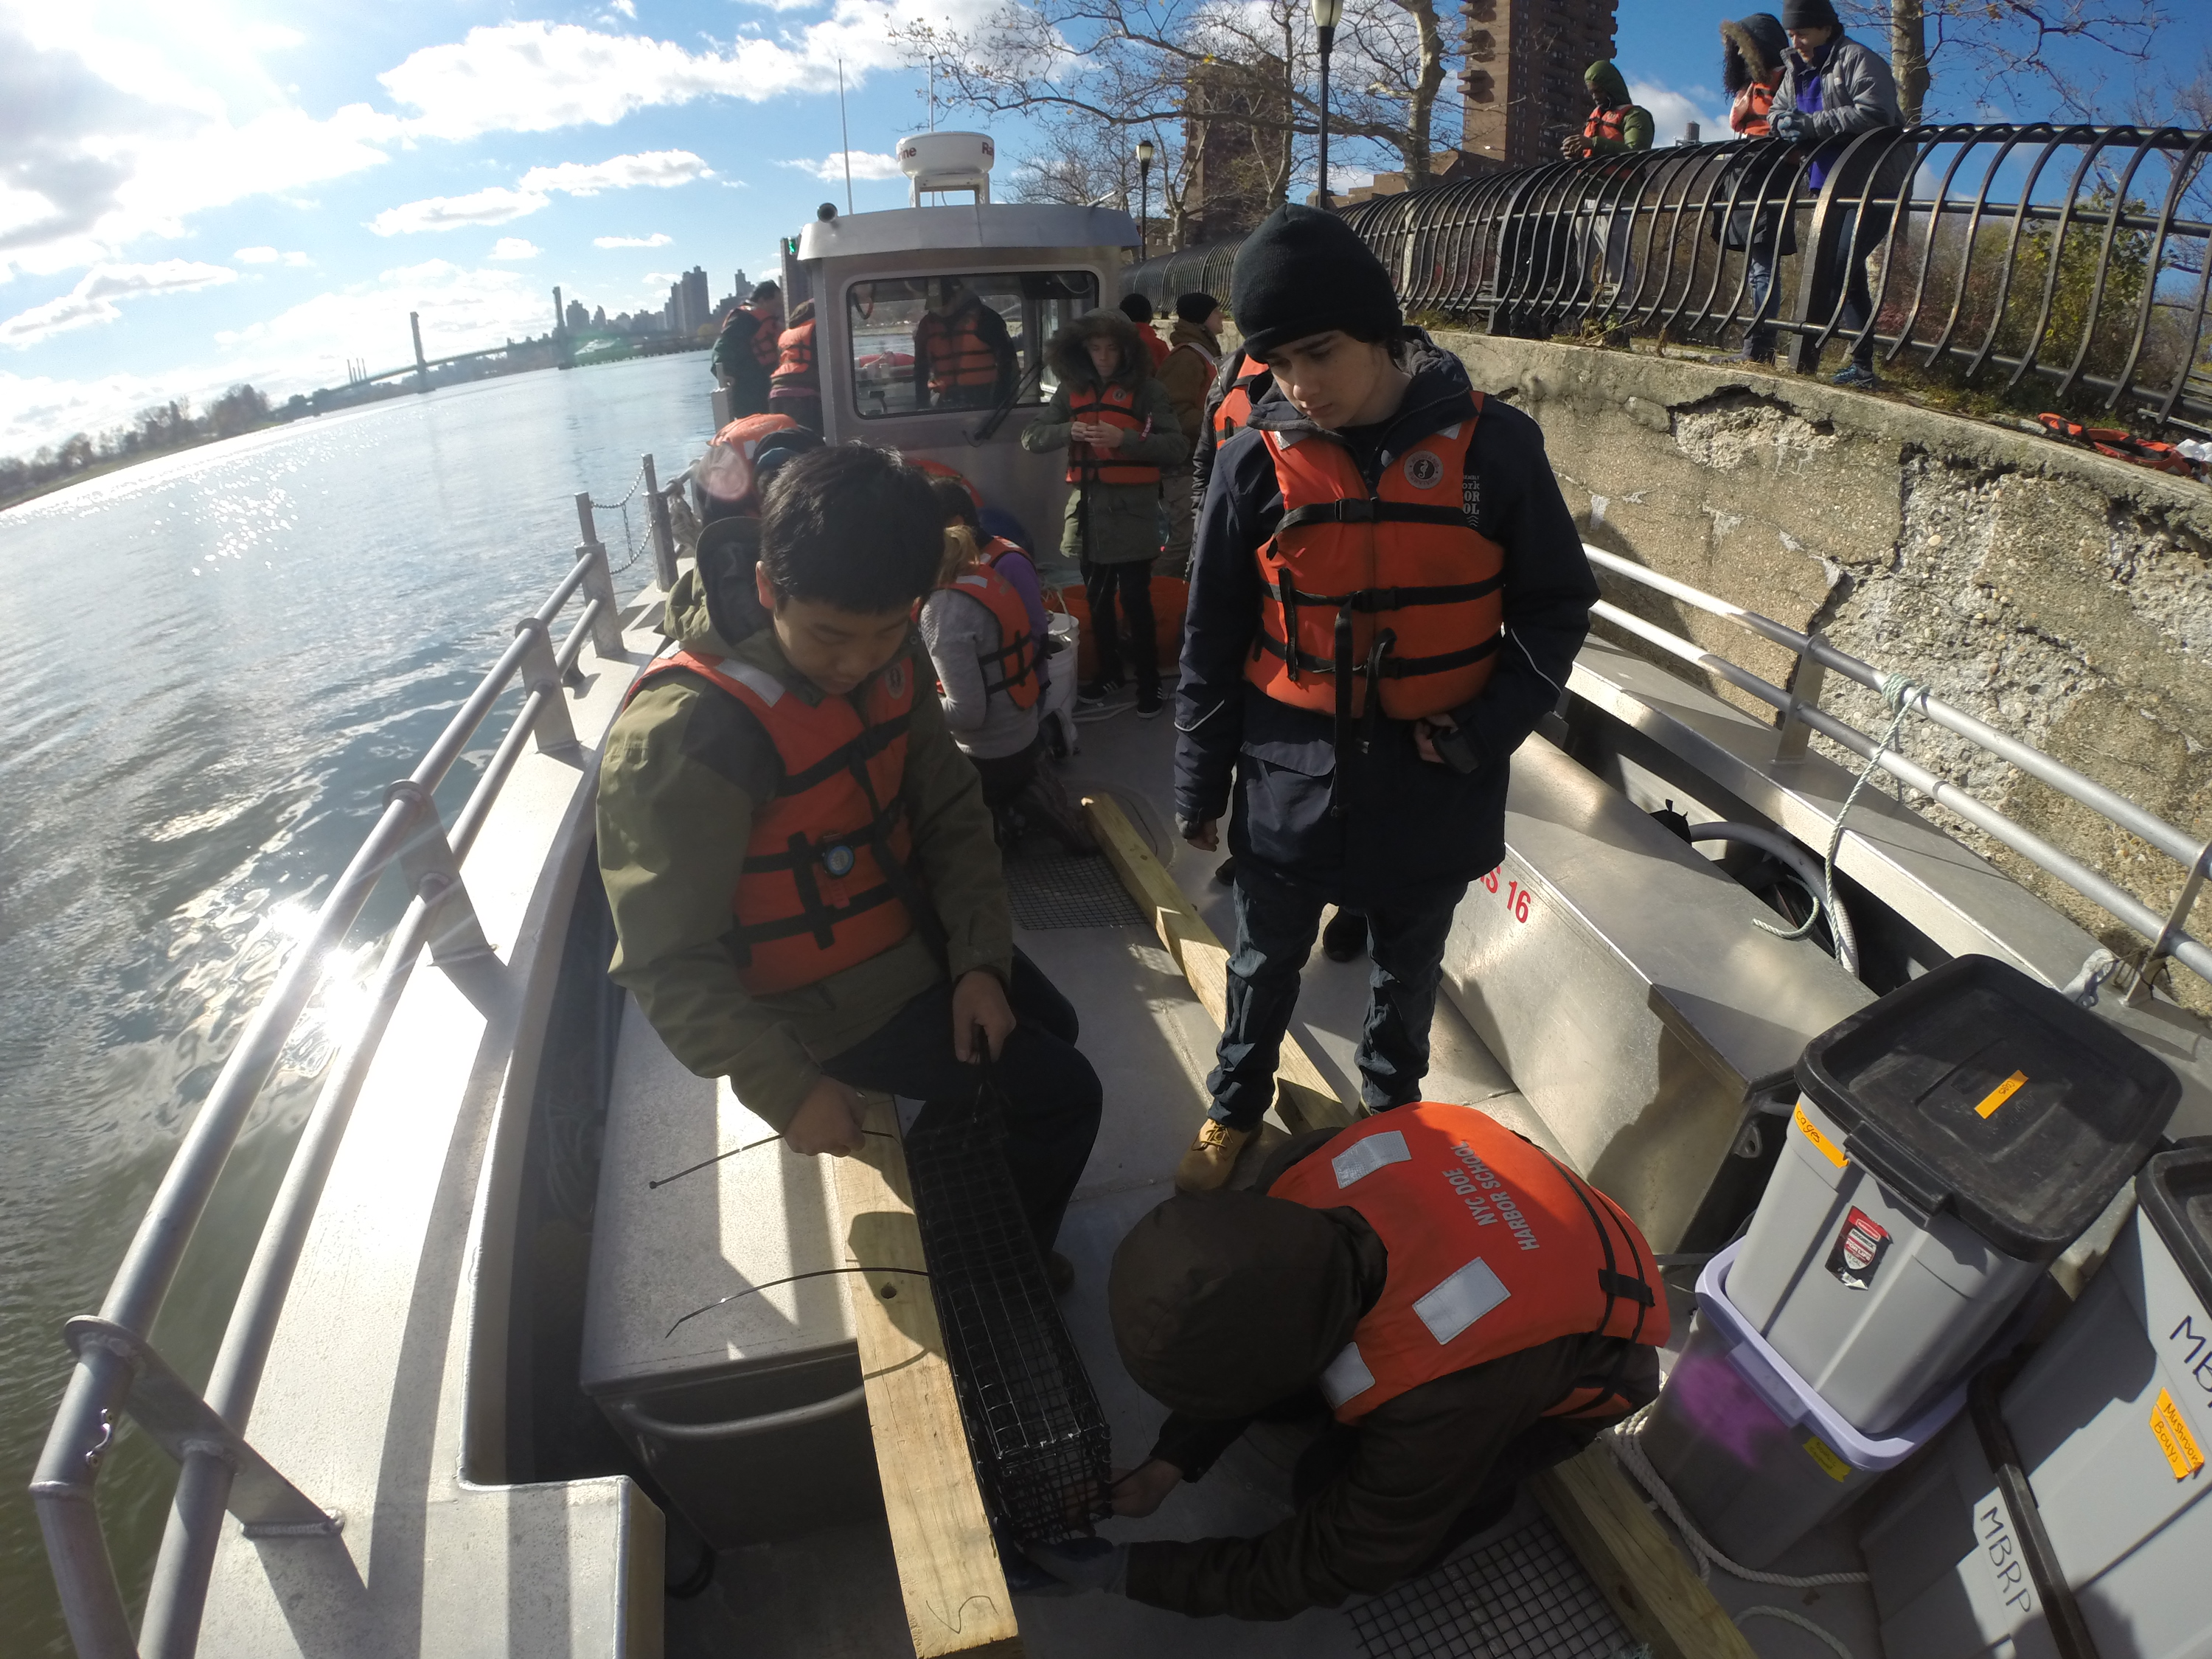 MBRP scholars deploying an experiment on the Harlem River for the Non-Profit group CIVITAS Citizens.